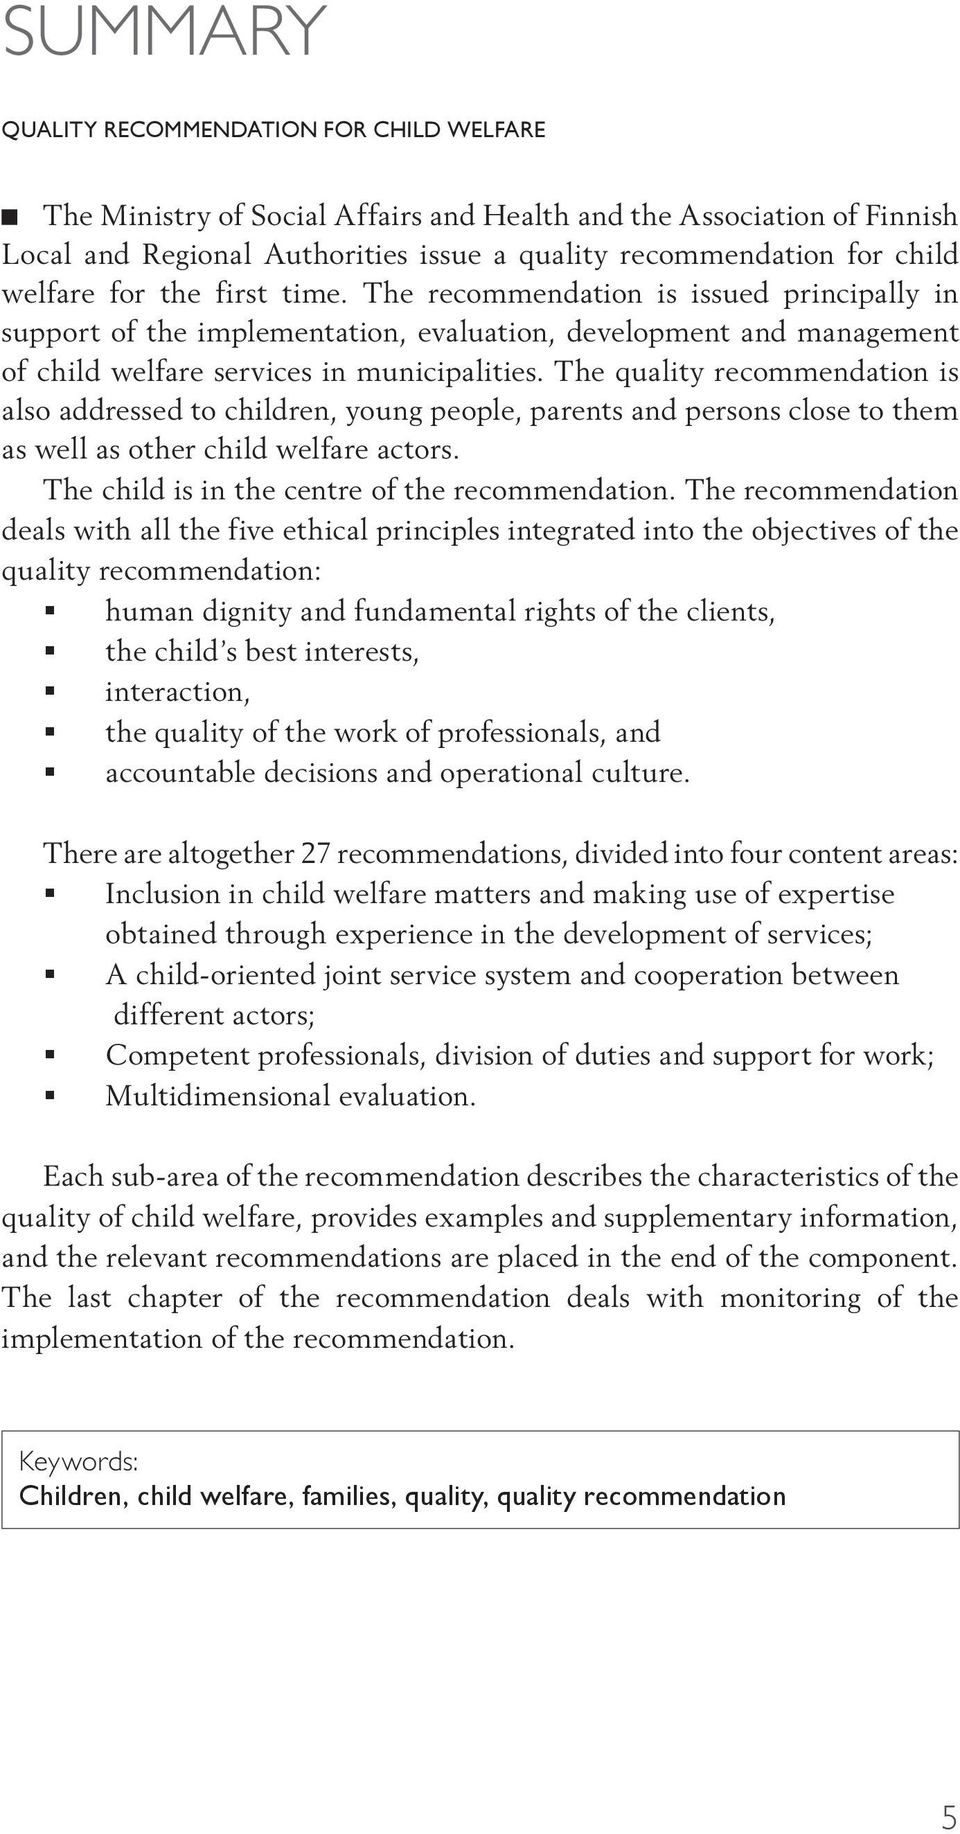 The quality recommendation is also addressed to children, young people, parents and persons close to them as well as other child welfare actors. The child is in the centre of the recommendation.